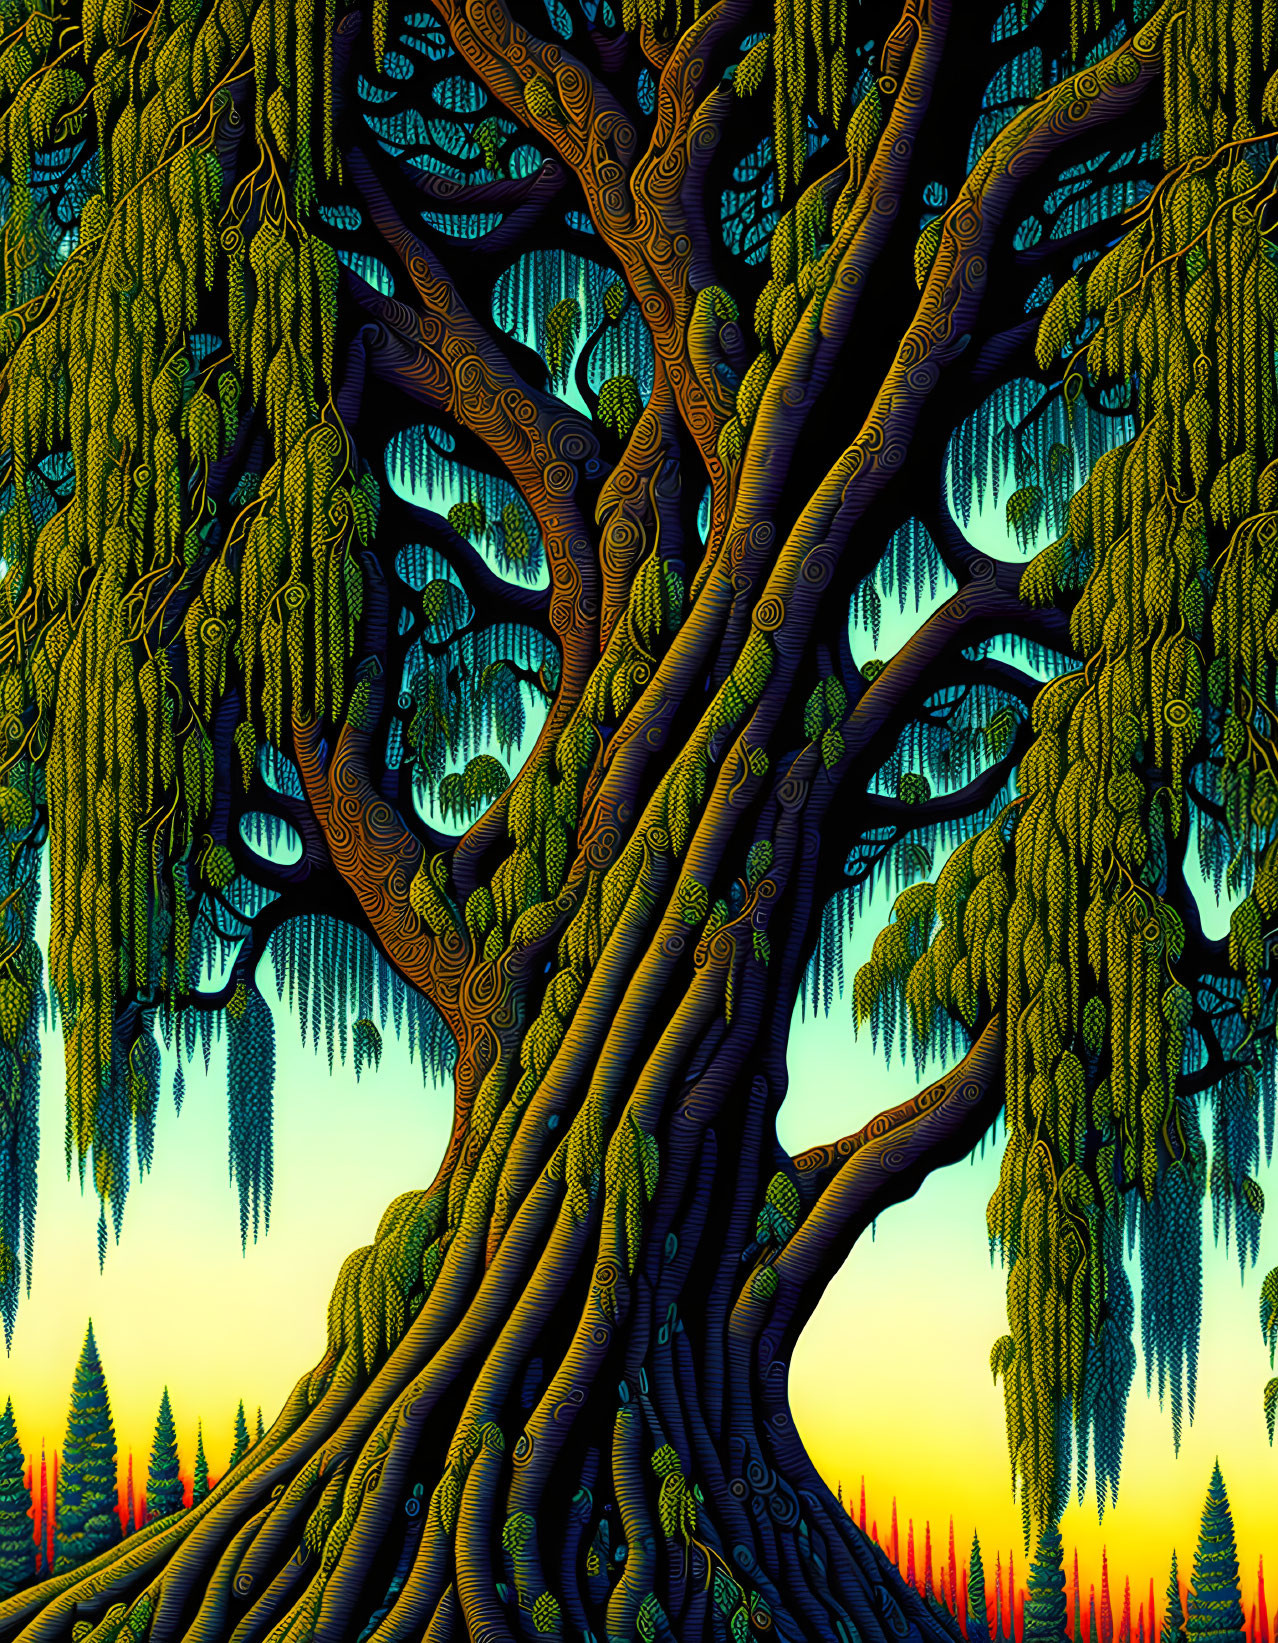 The Weeping Willow